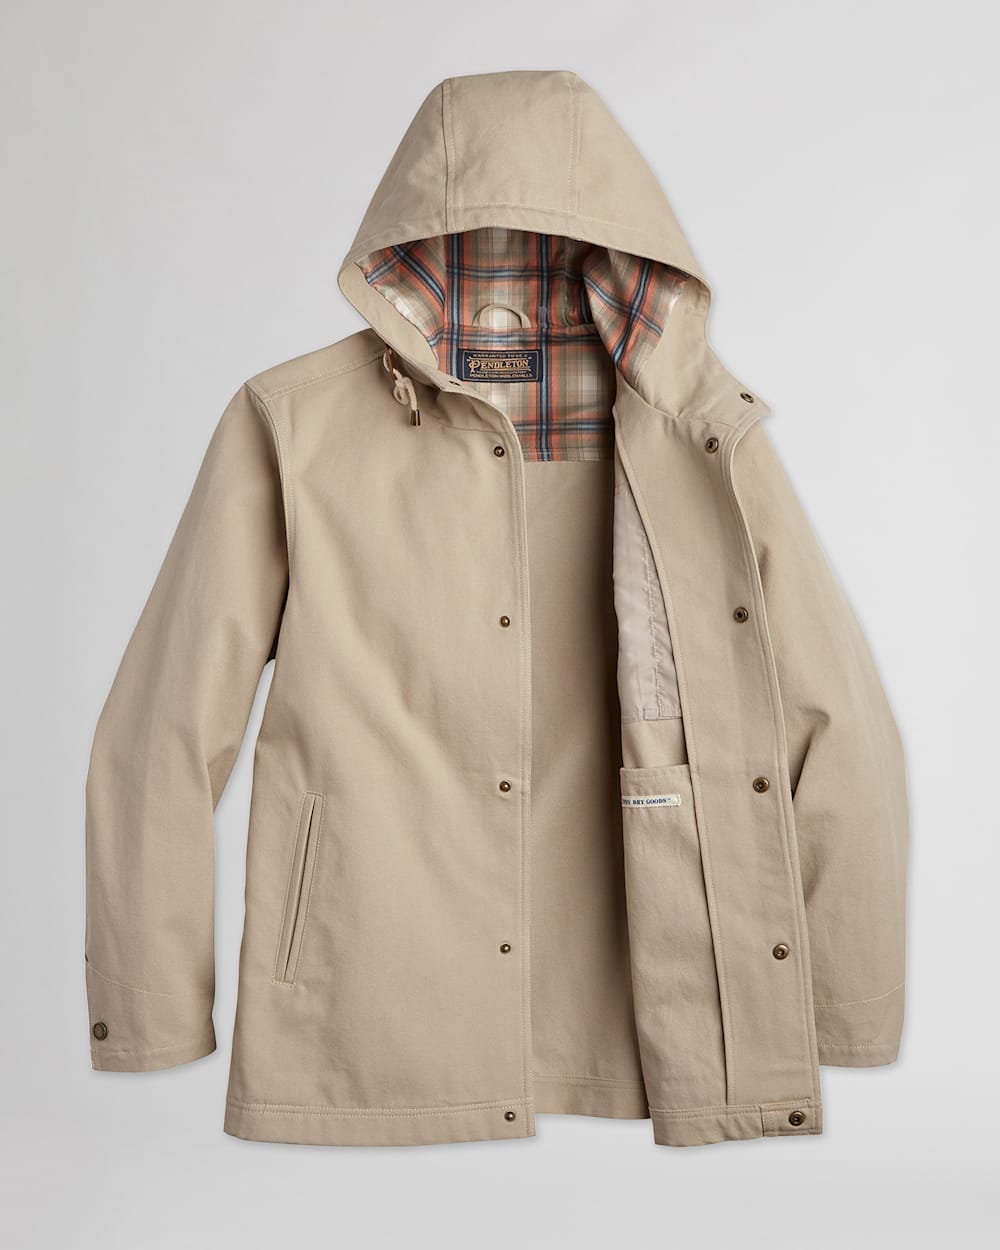 ALTERNATE VIEW OF MEN'S BLACK HAWK HOODED CANVAS JACKET IN TAUPE image number 2